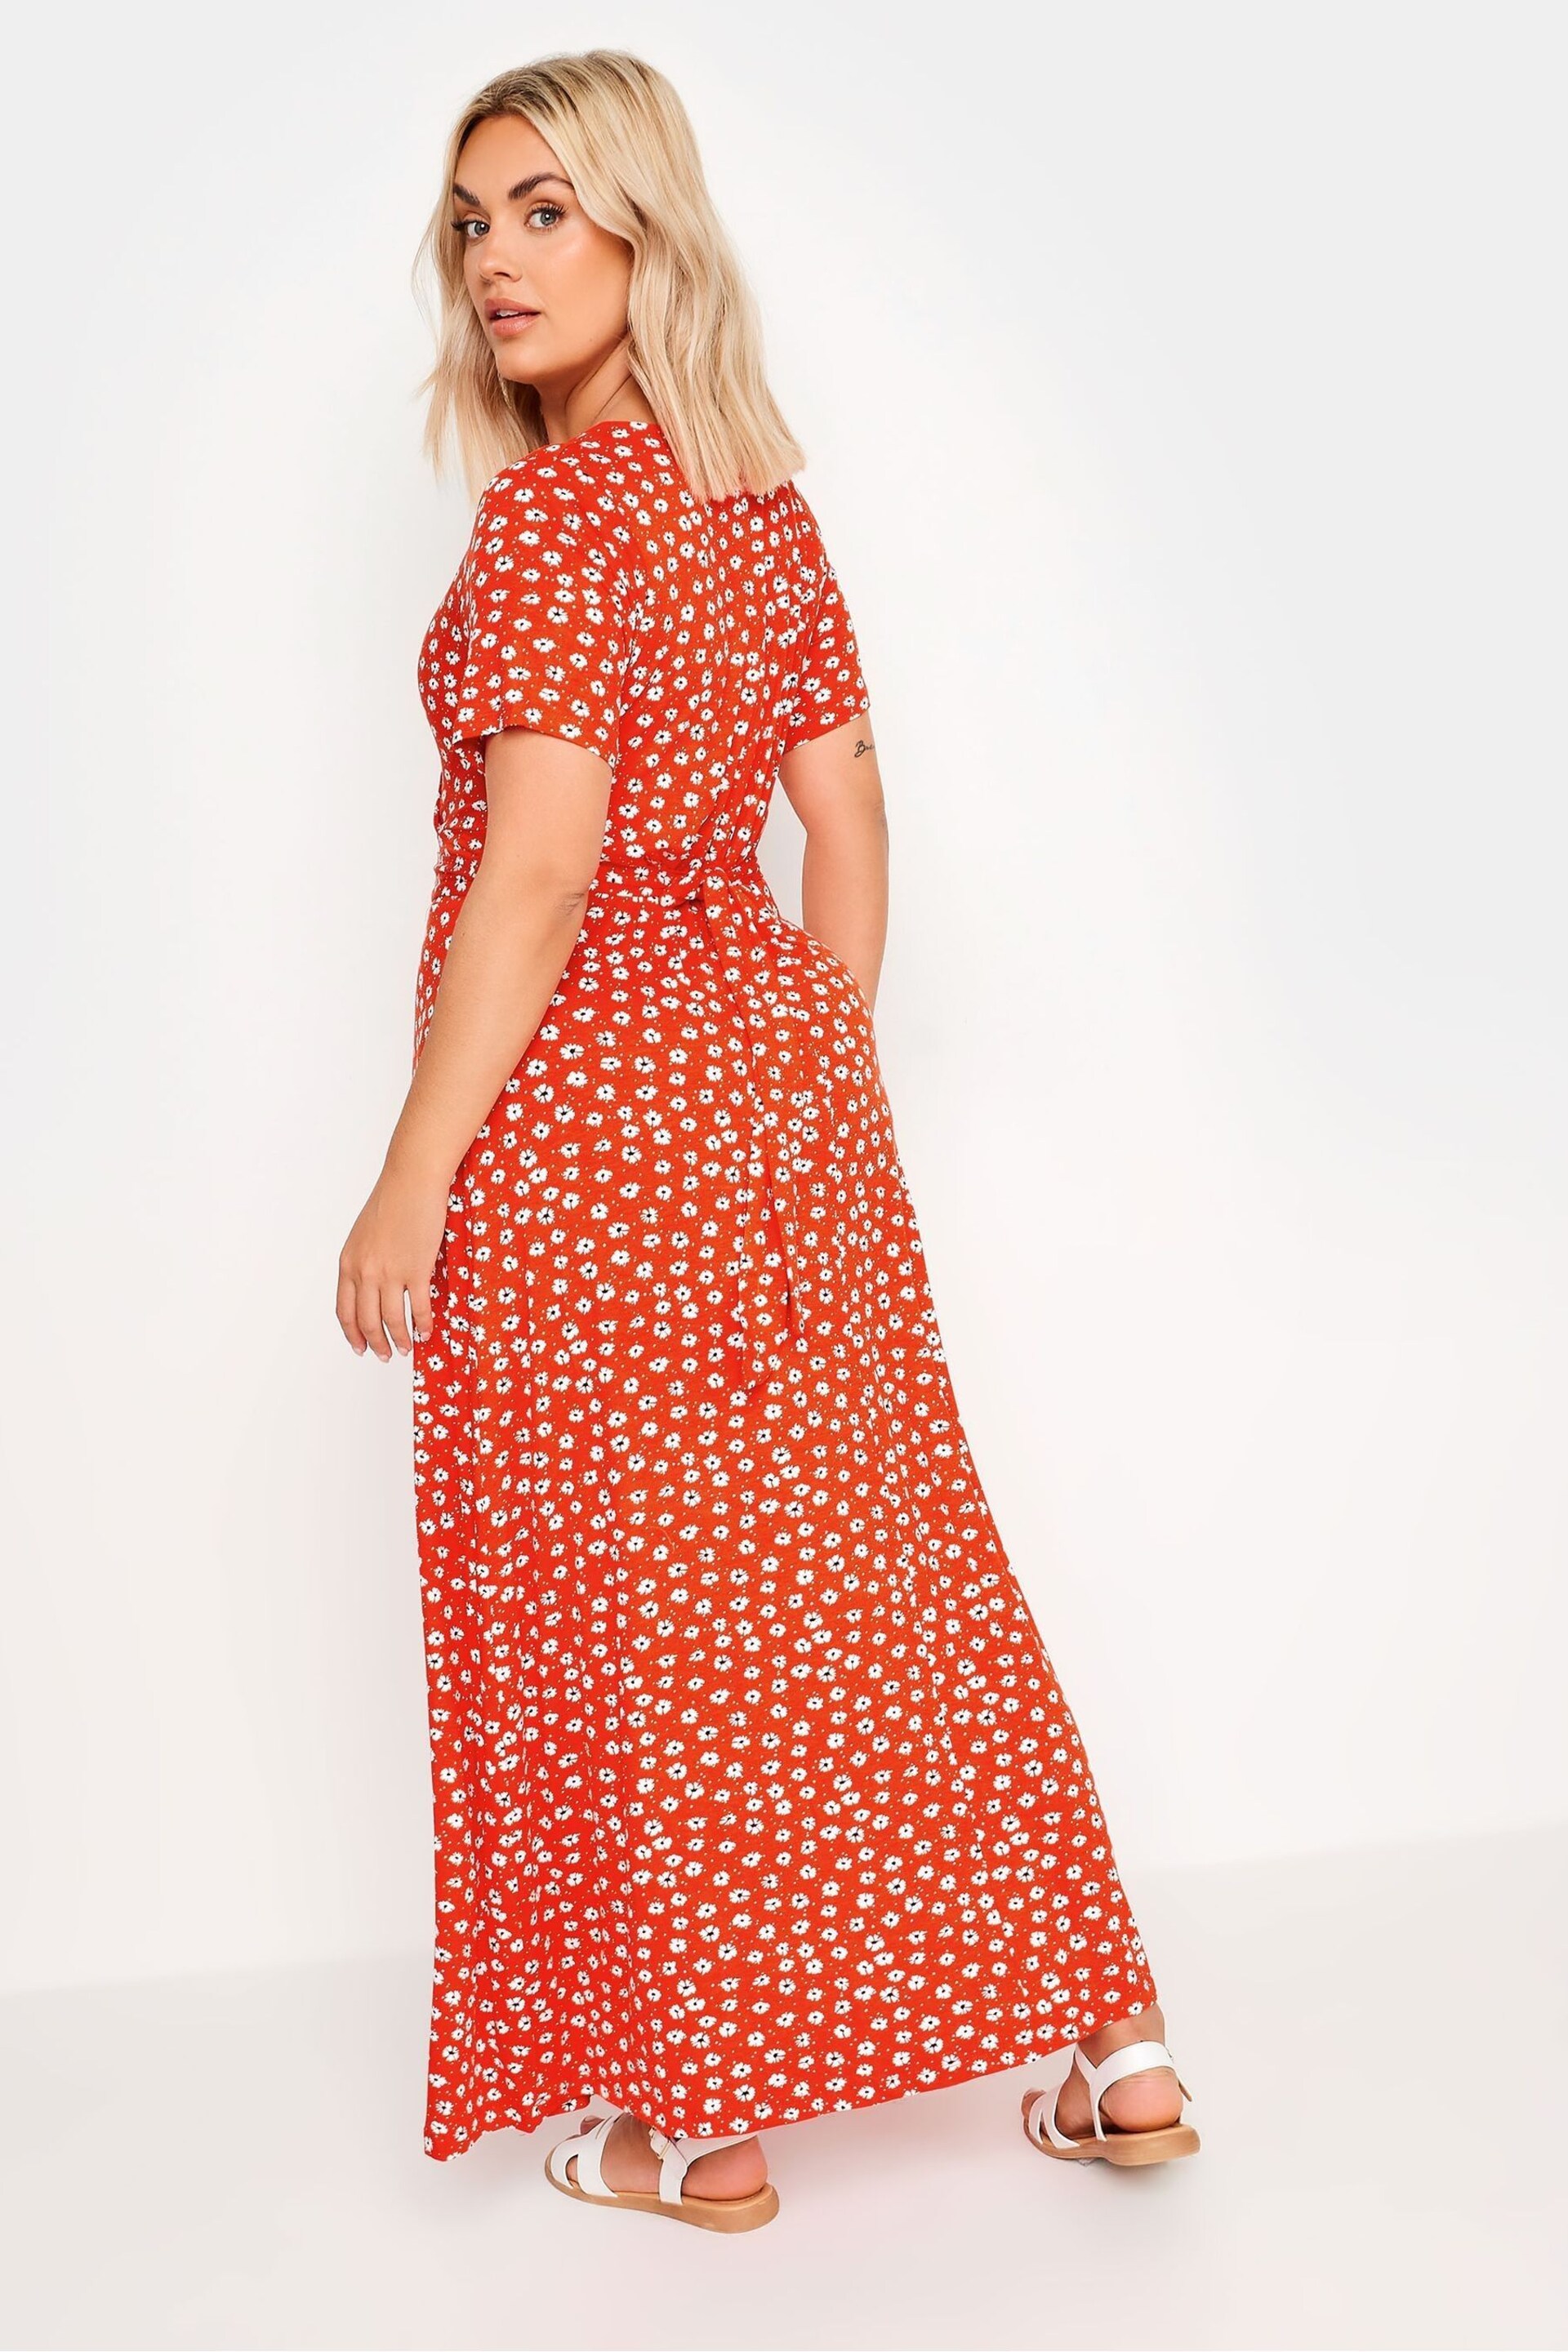 Yours Curve Orange Ditsy Floral Print Wrap Maxi Dress - Image 3 of 5